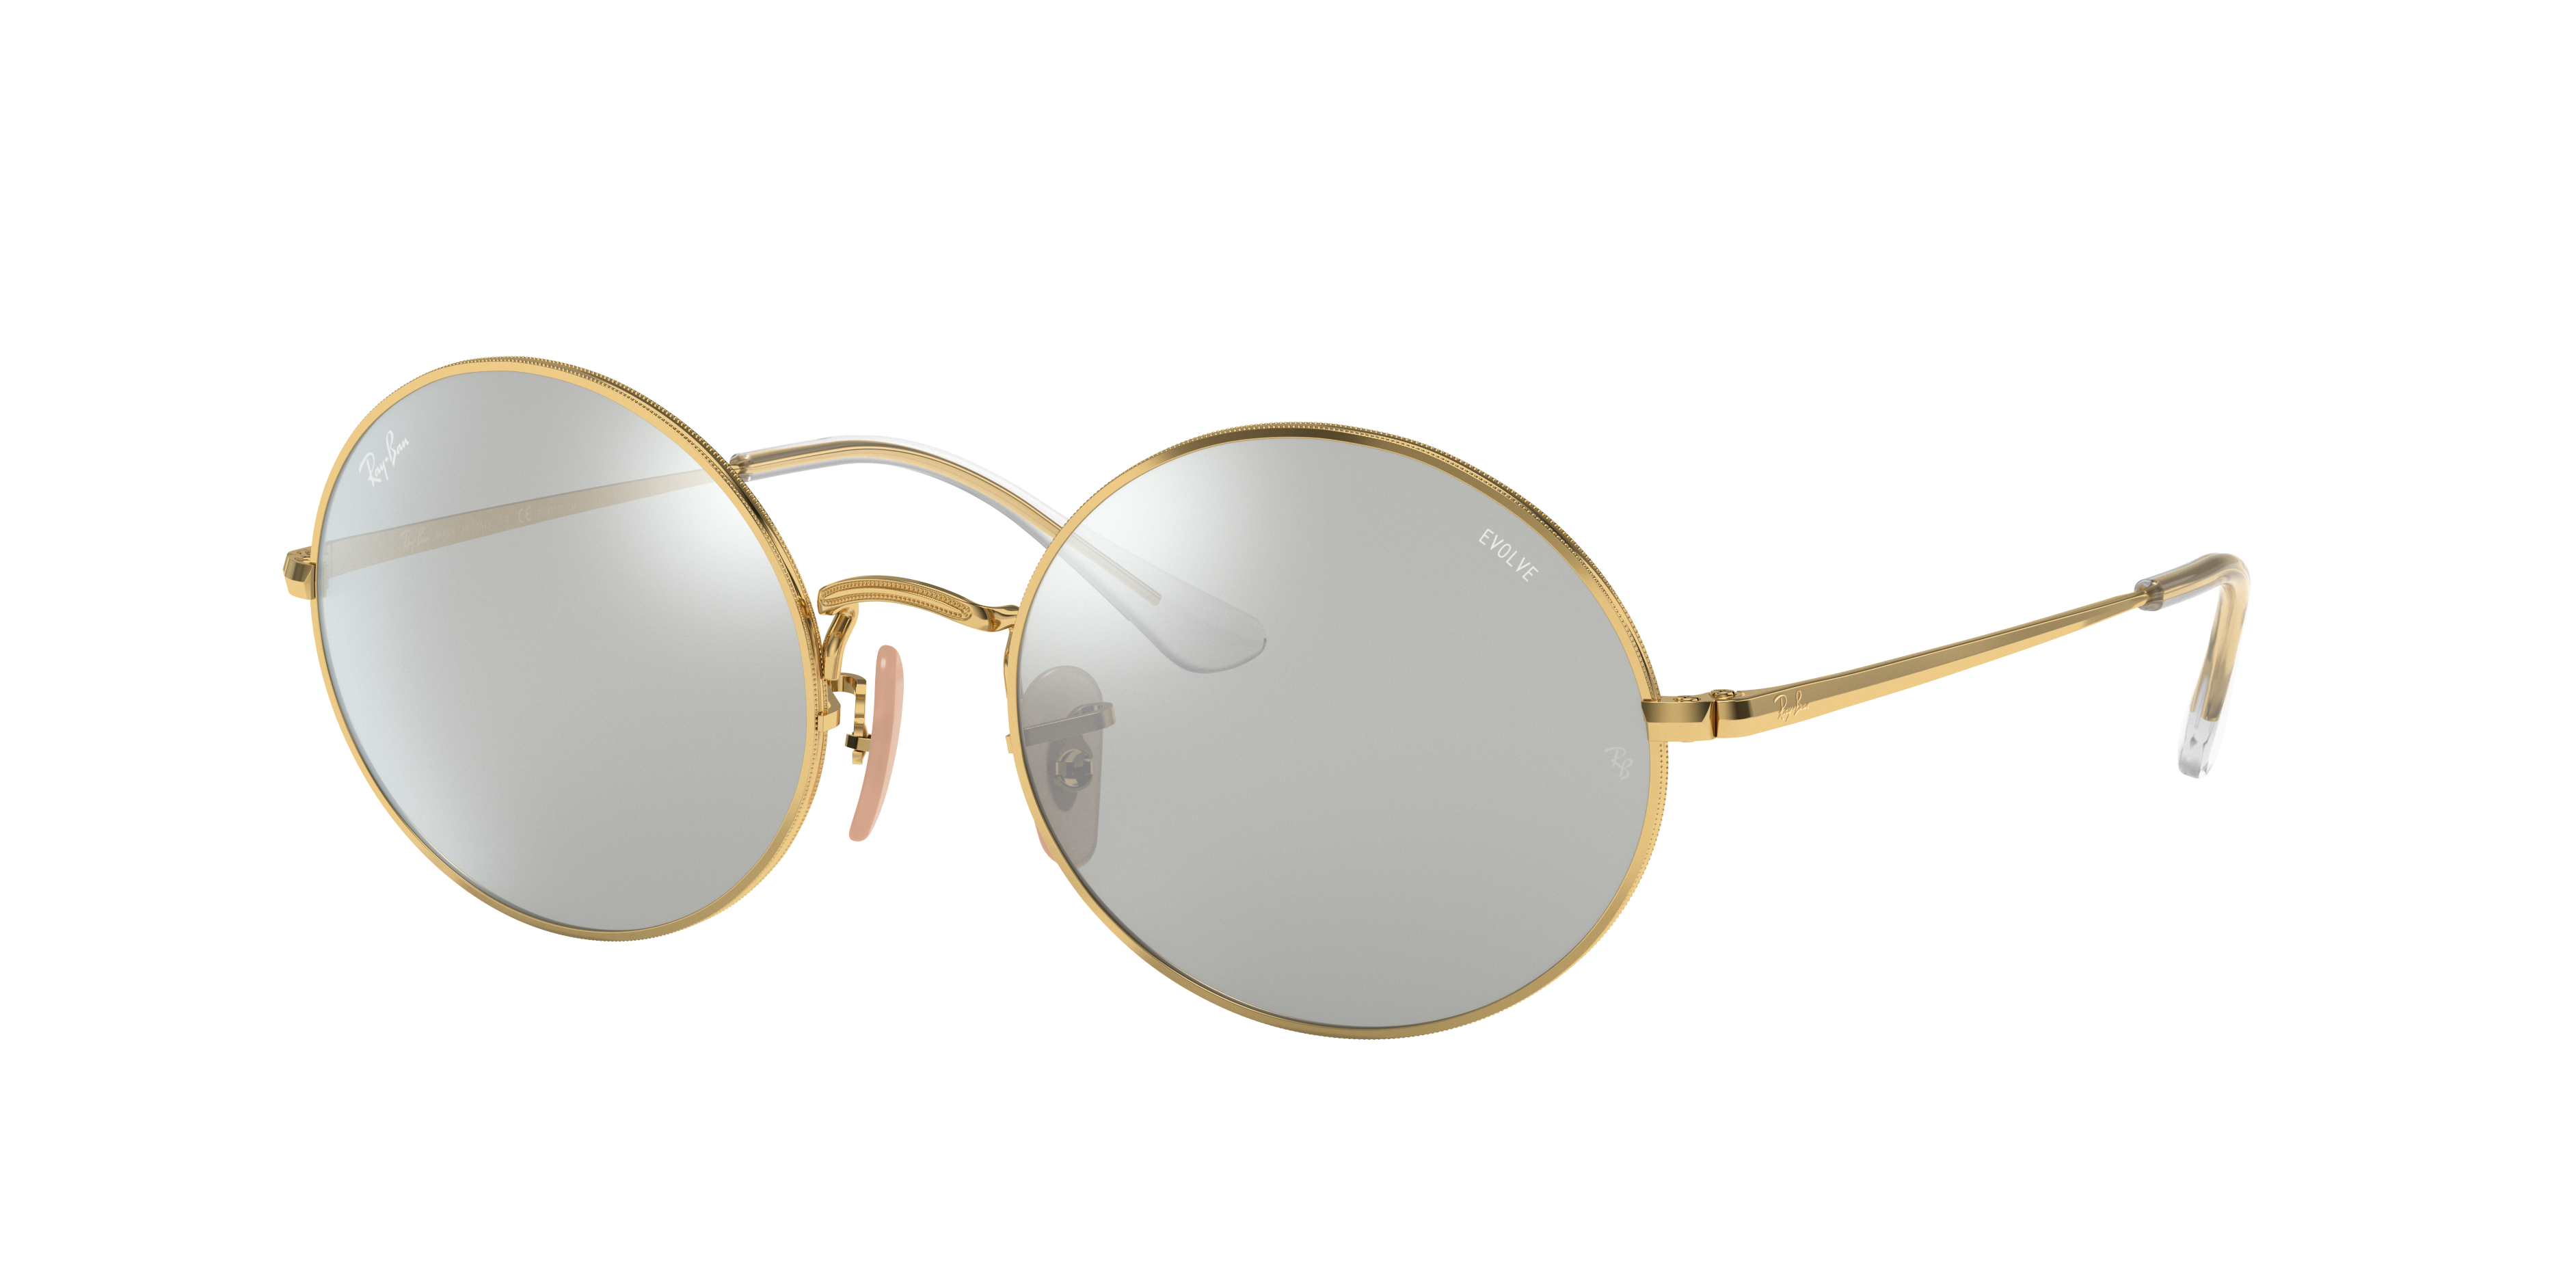 Ray-Ban Oval 1970 Mirror Evolve RB1970 